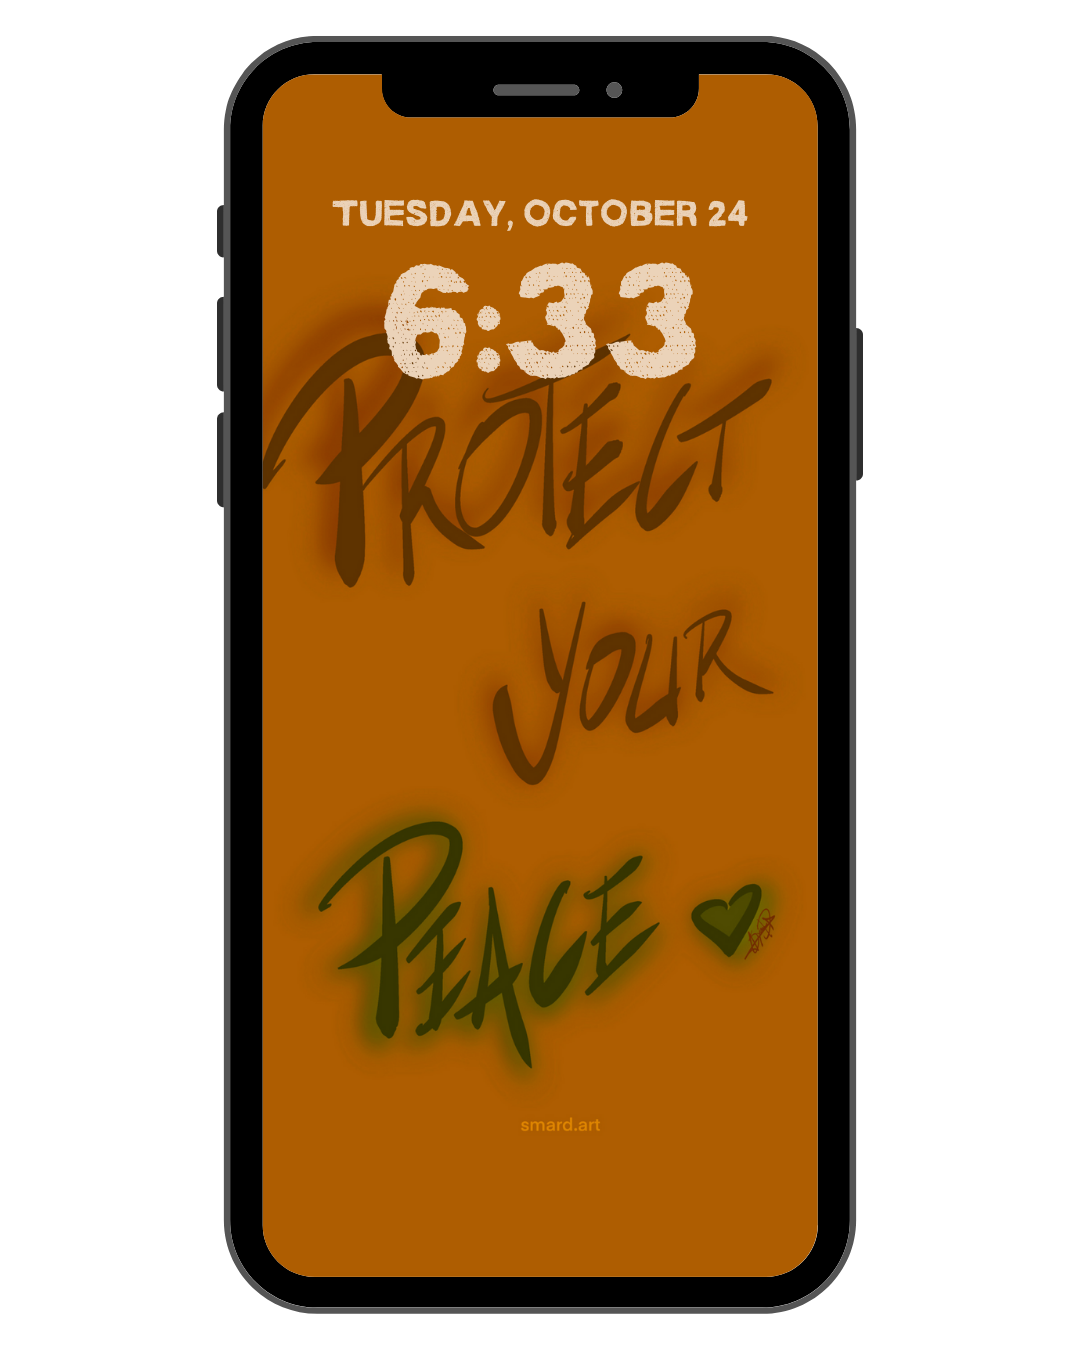 Protect Your Peace - Phone Screensaver